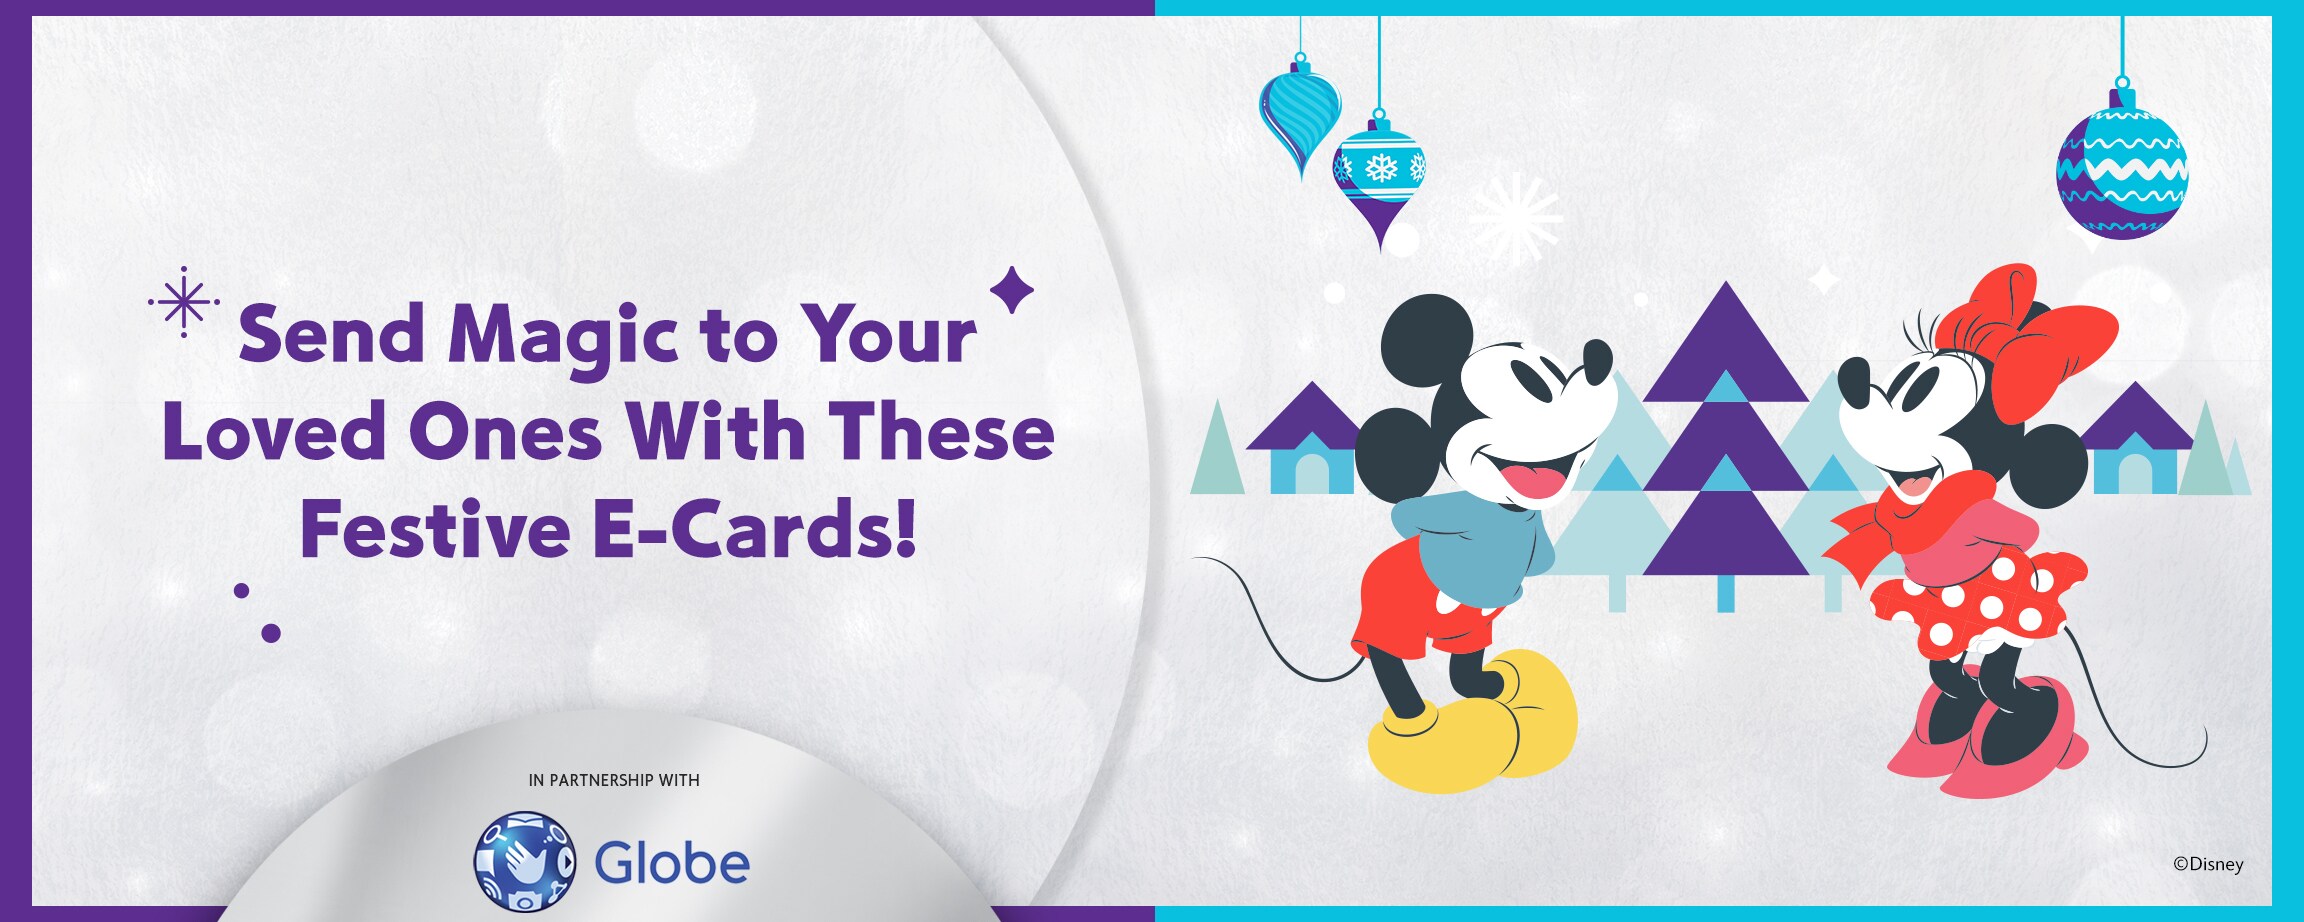 Send Magic To Your Loved Ones With E-cards Featuring Your Favorite Disney Characters!